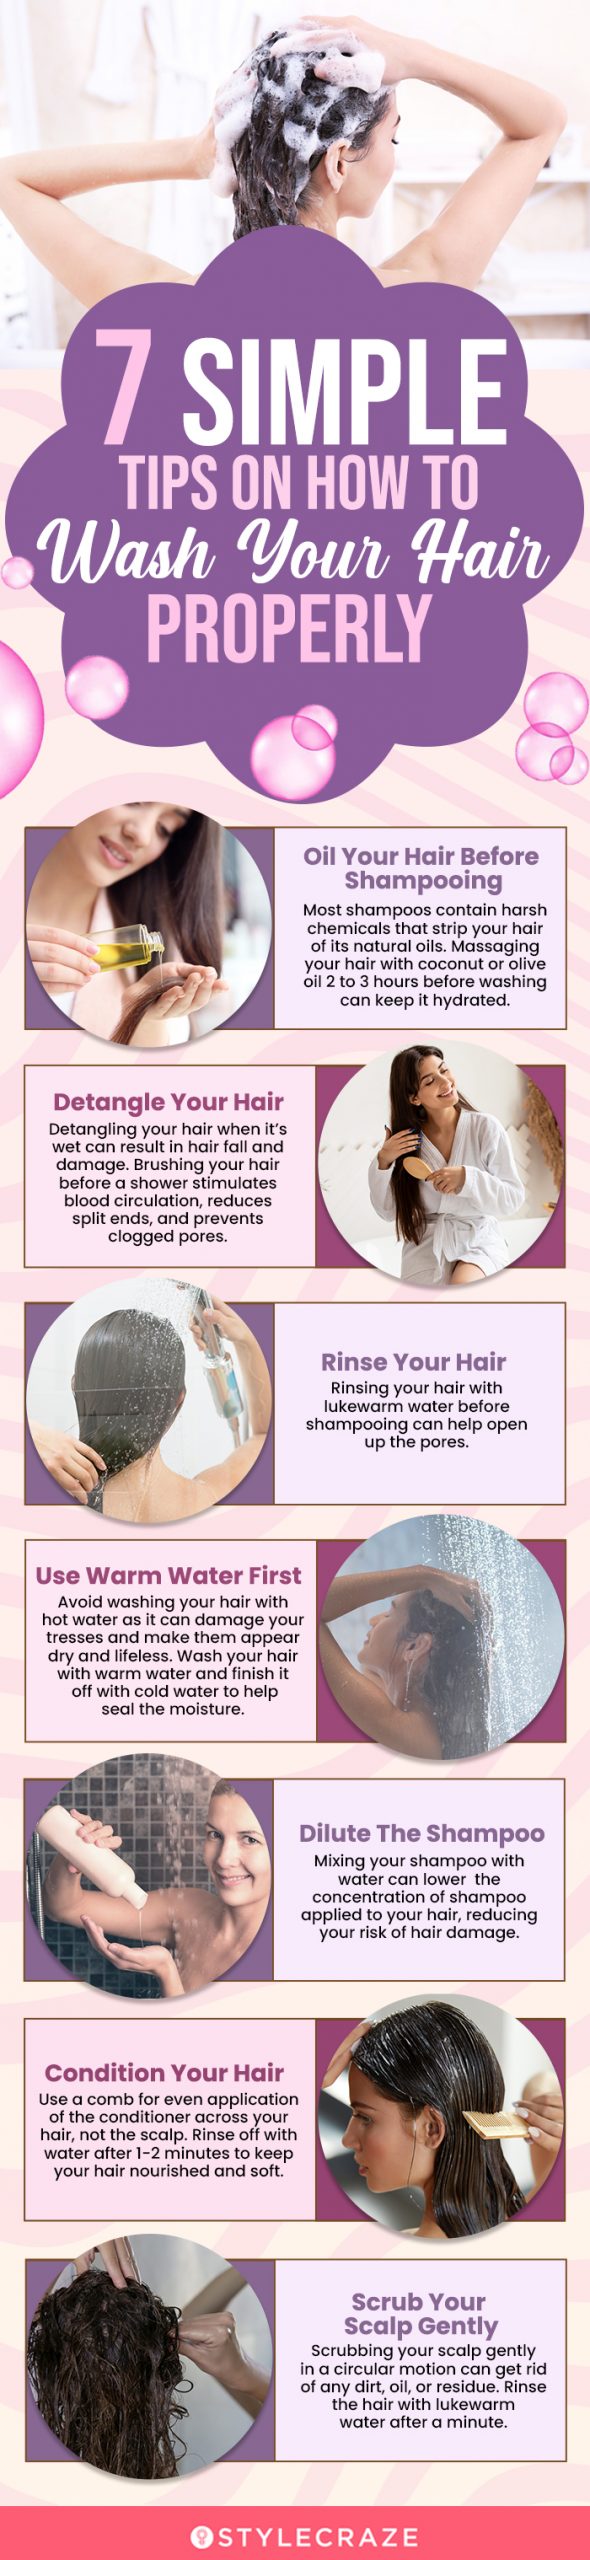 7 simple tips on how to wash your hair properly (infographic)